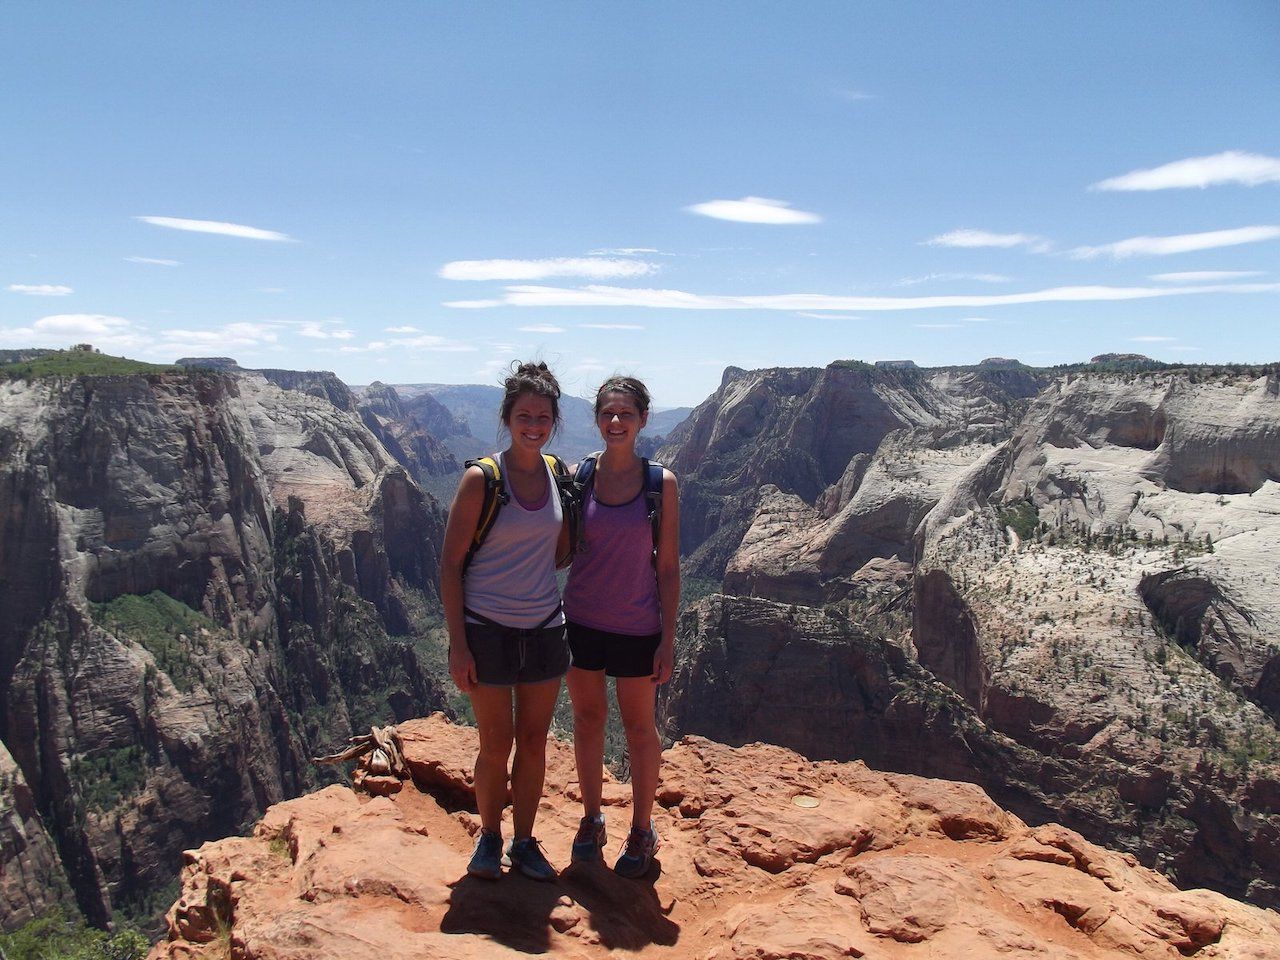 Two travelers in Zion National Park